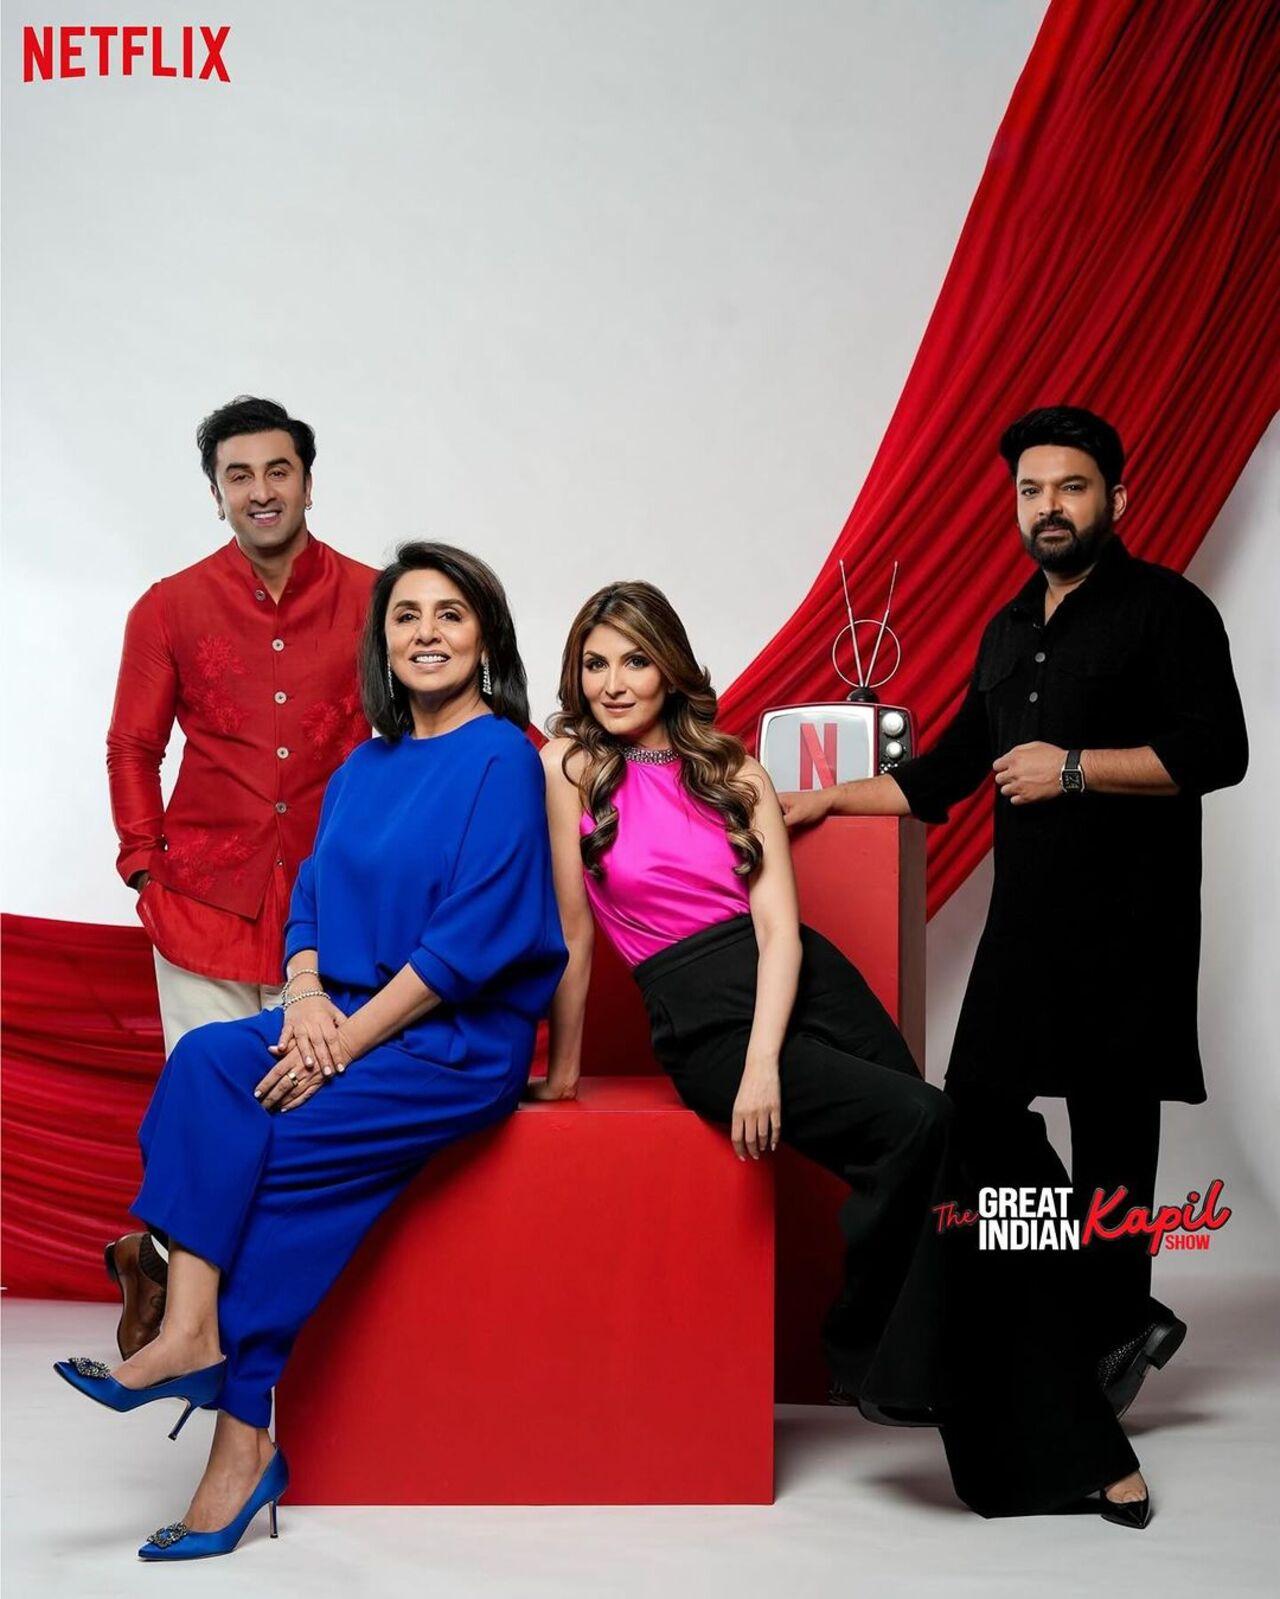 As it is set for its premiere tonight at 8 pm, the opening guests are none other than Ranbir Kapoor, Neetu Kapoor, and Riddhima Kapoor Sahani.